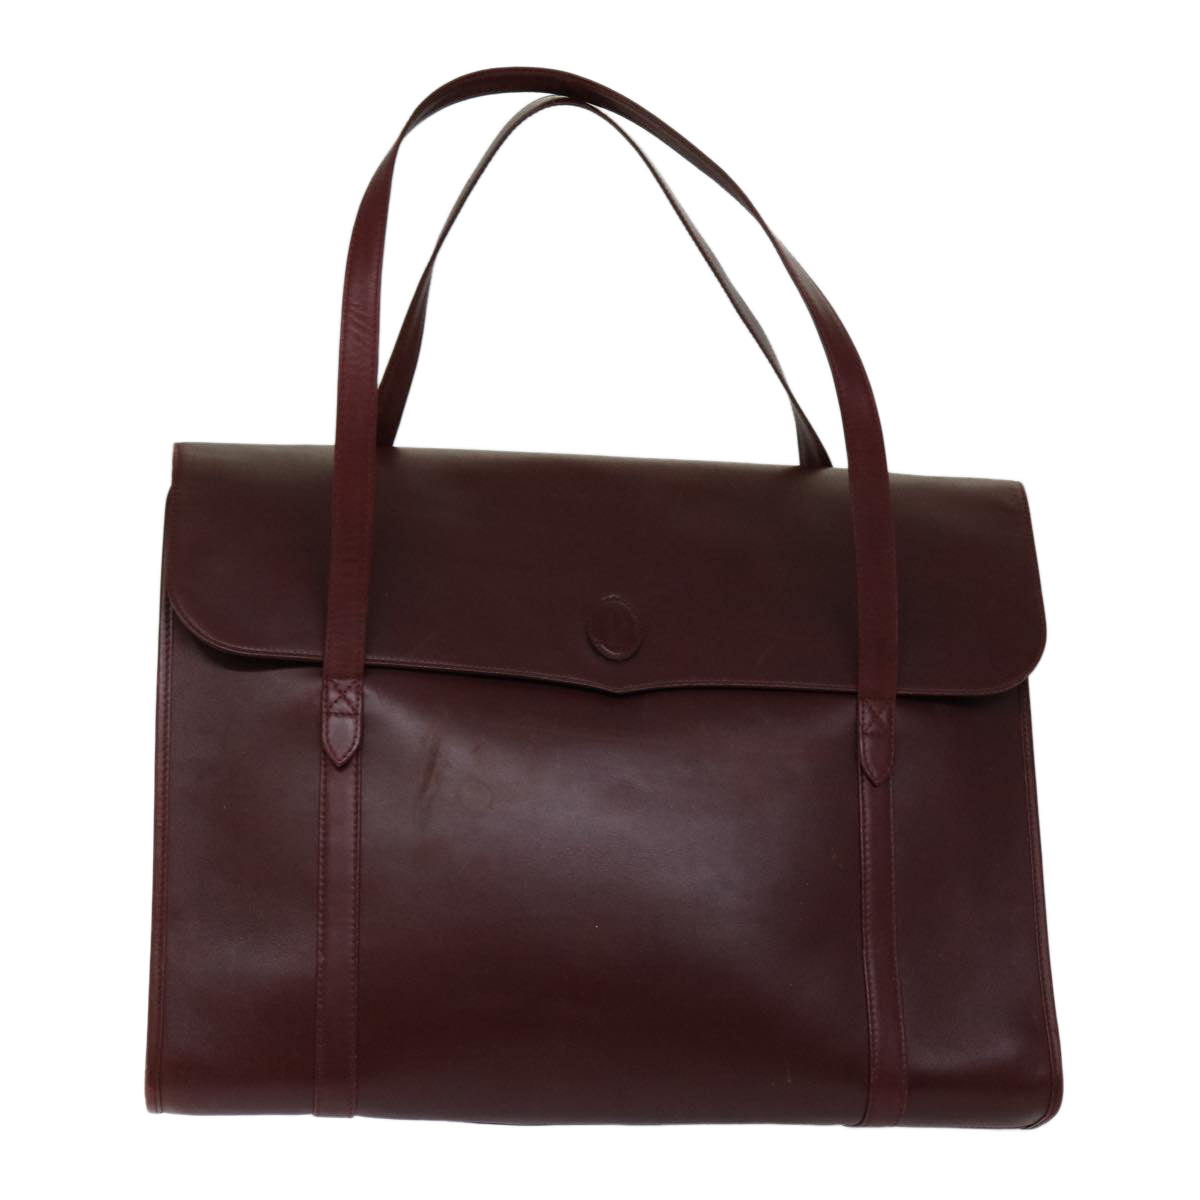 CARTIER Hand Bag Leather Bordeaux Wine Red Auth bs12863